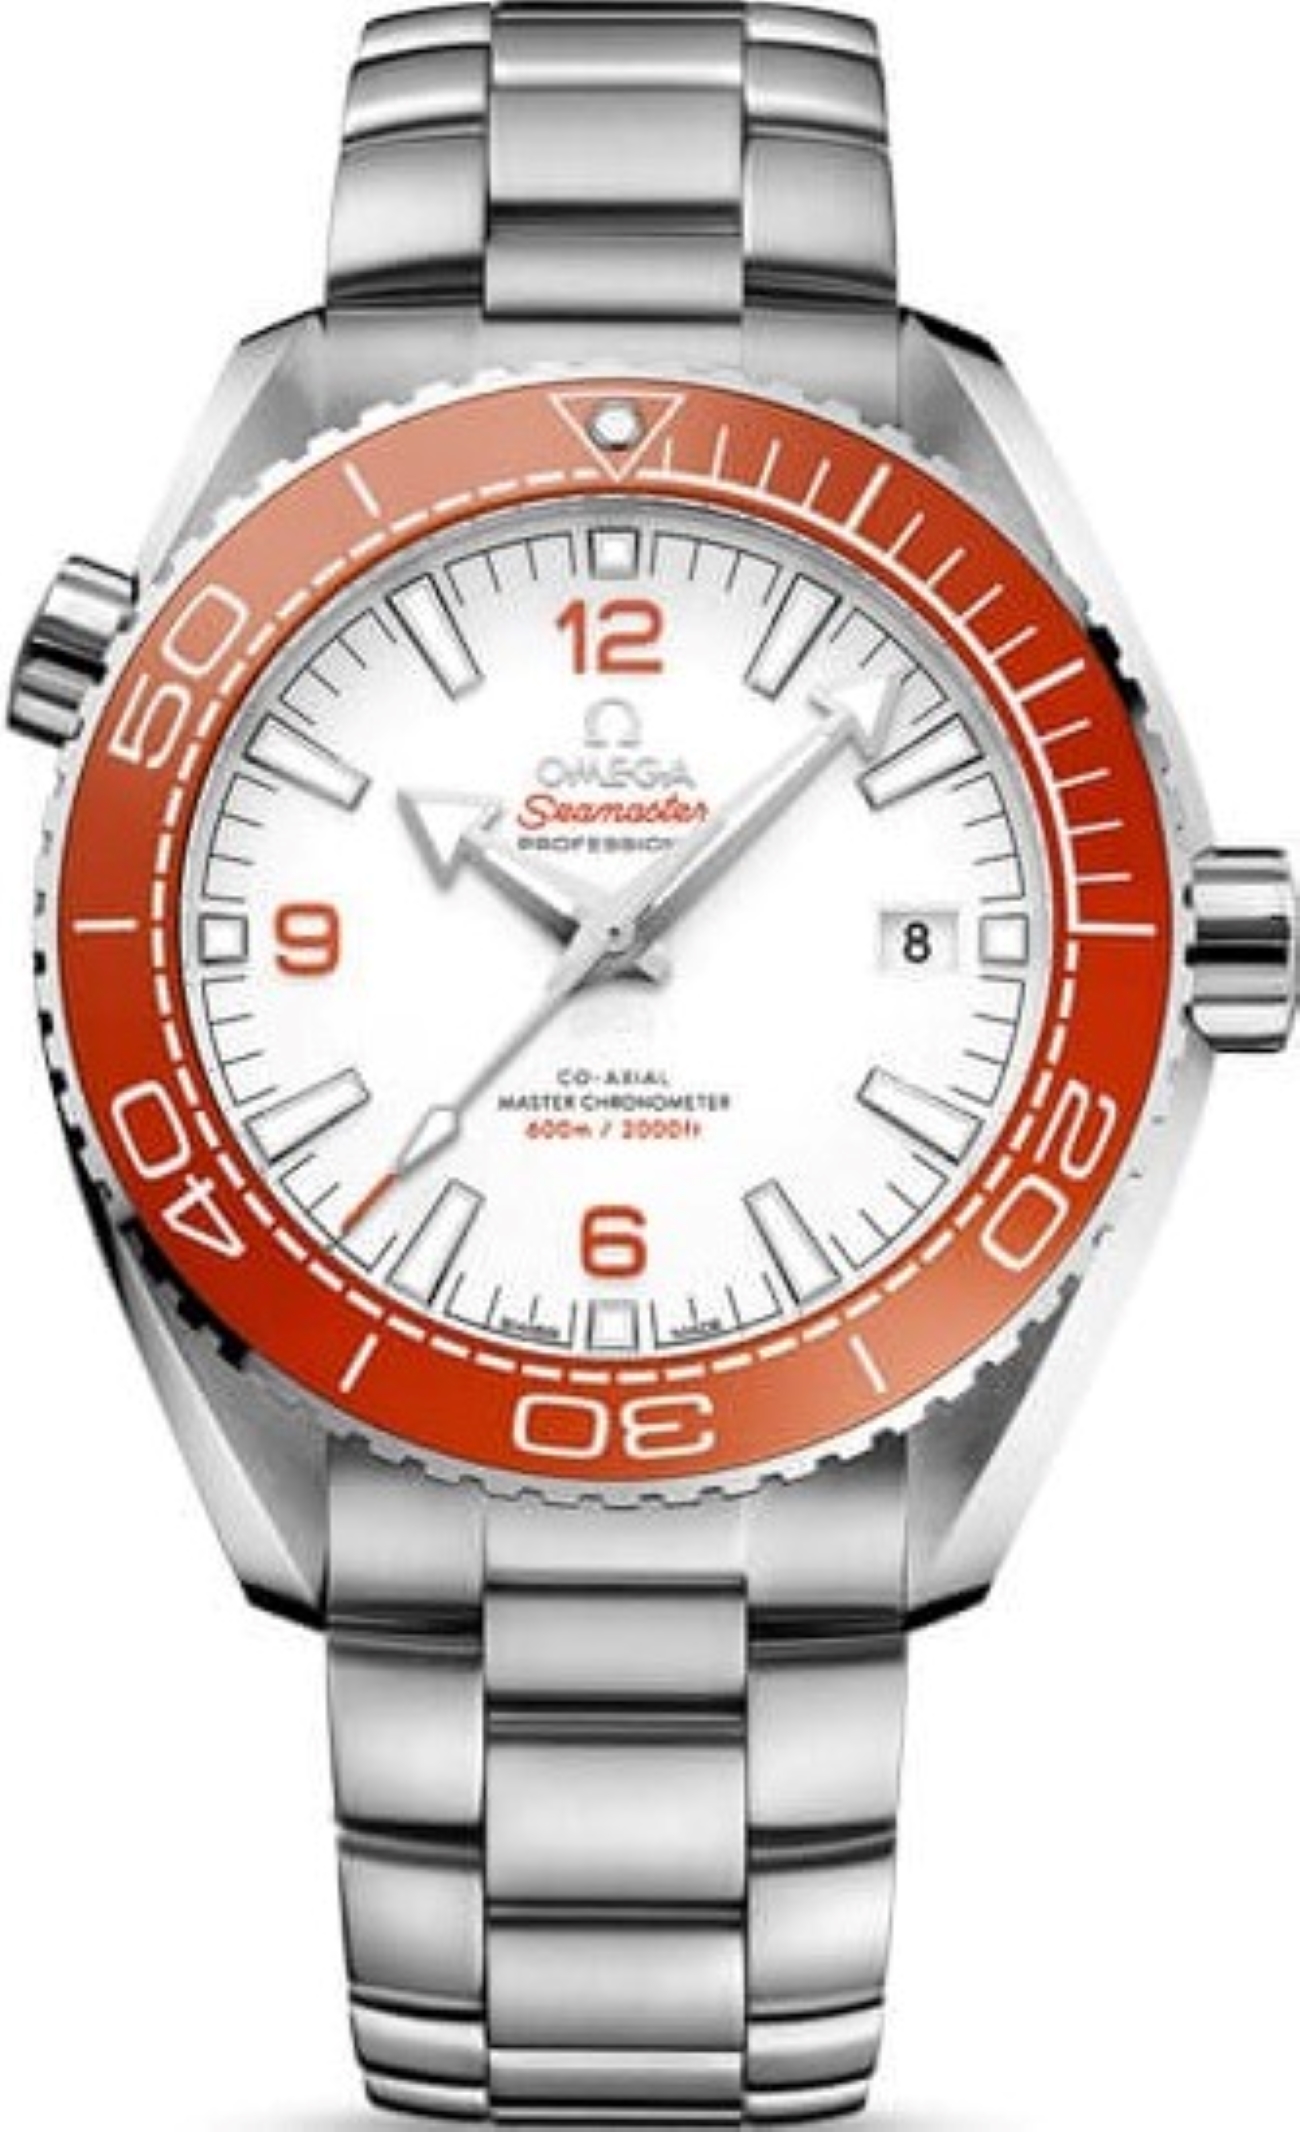 OMEGA SEAMASTER PLANET OCEAN 43.5MM STEEL AUTOMATIC REF: 215.30.44.21.04.001